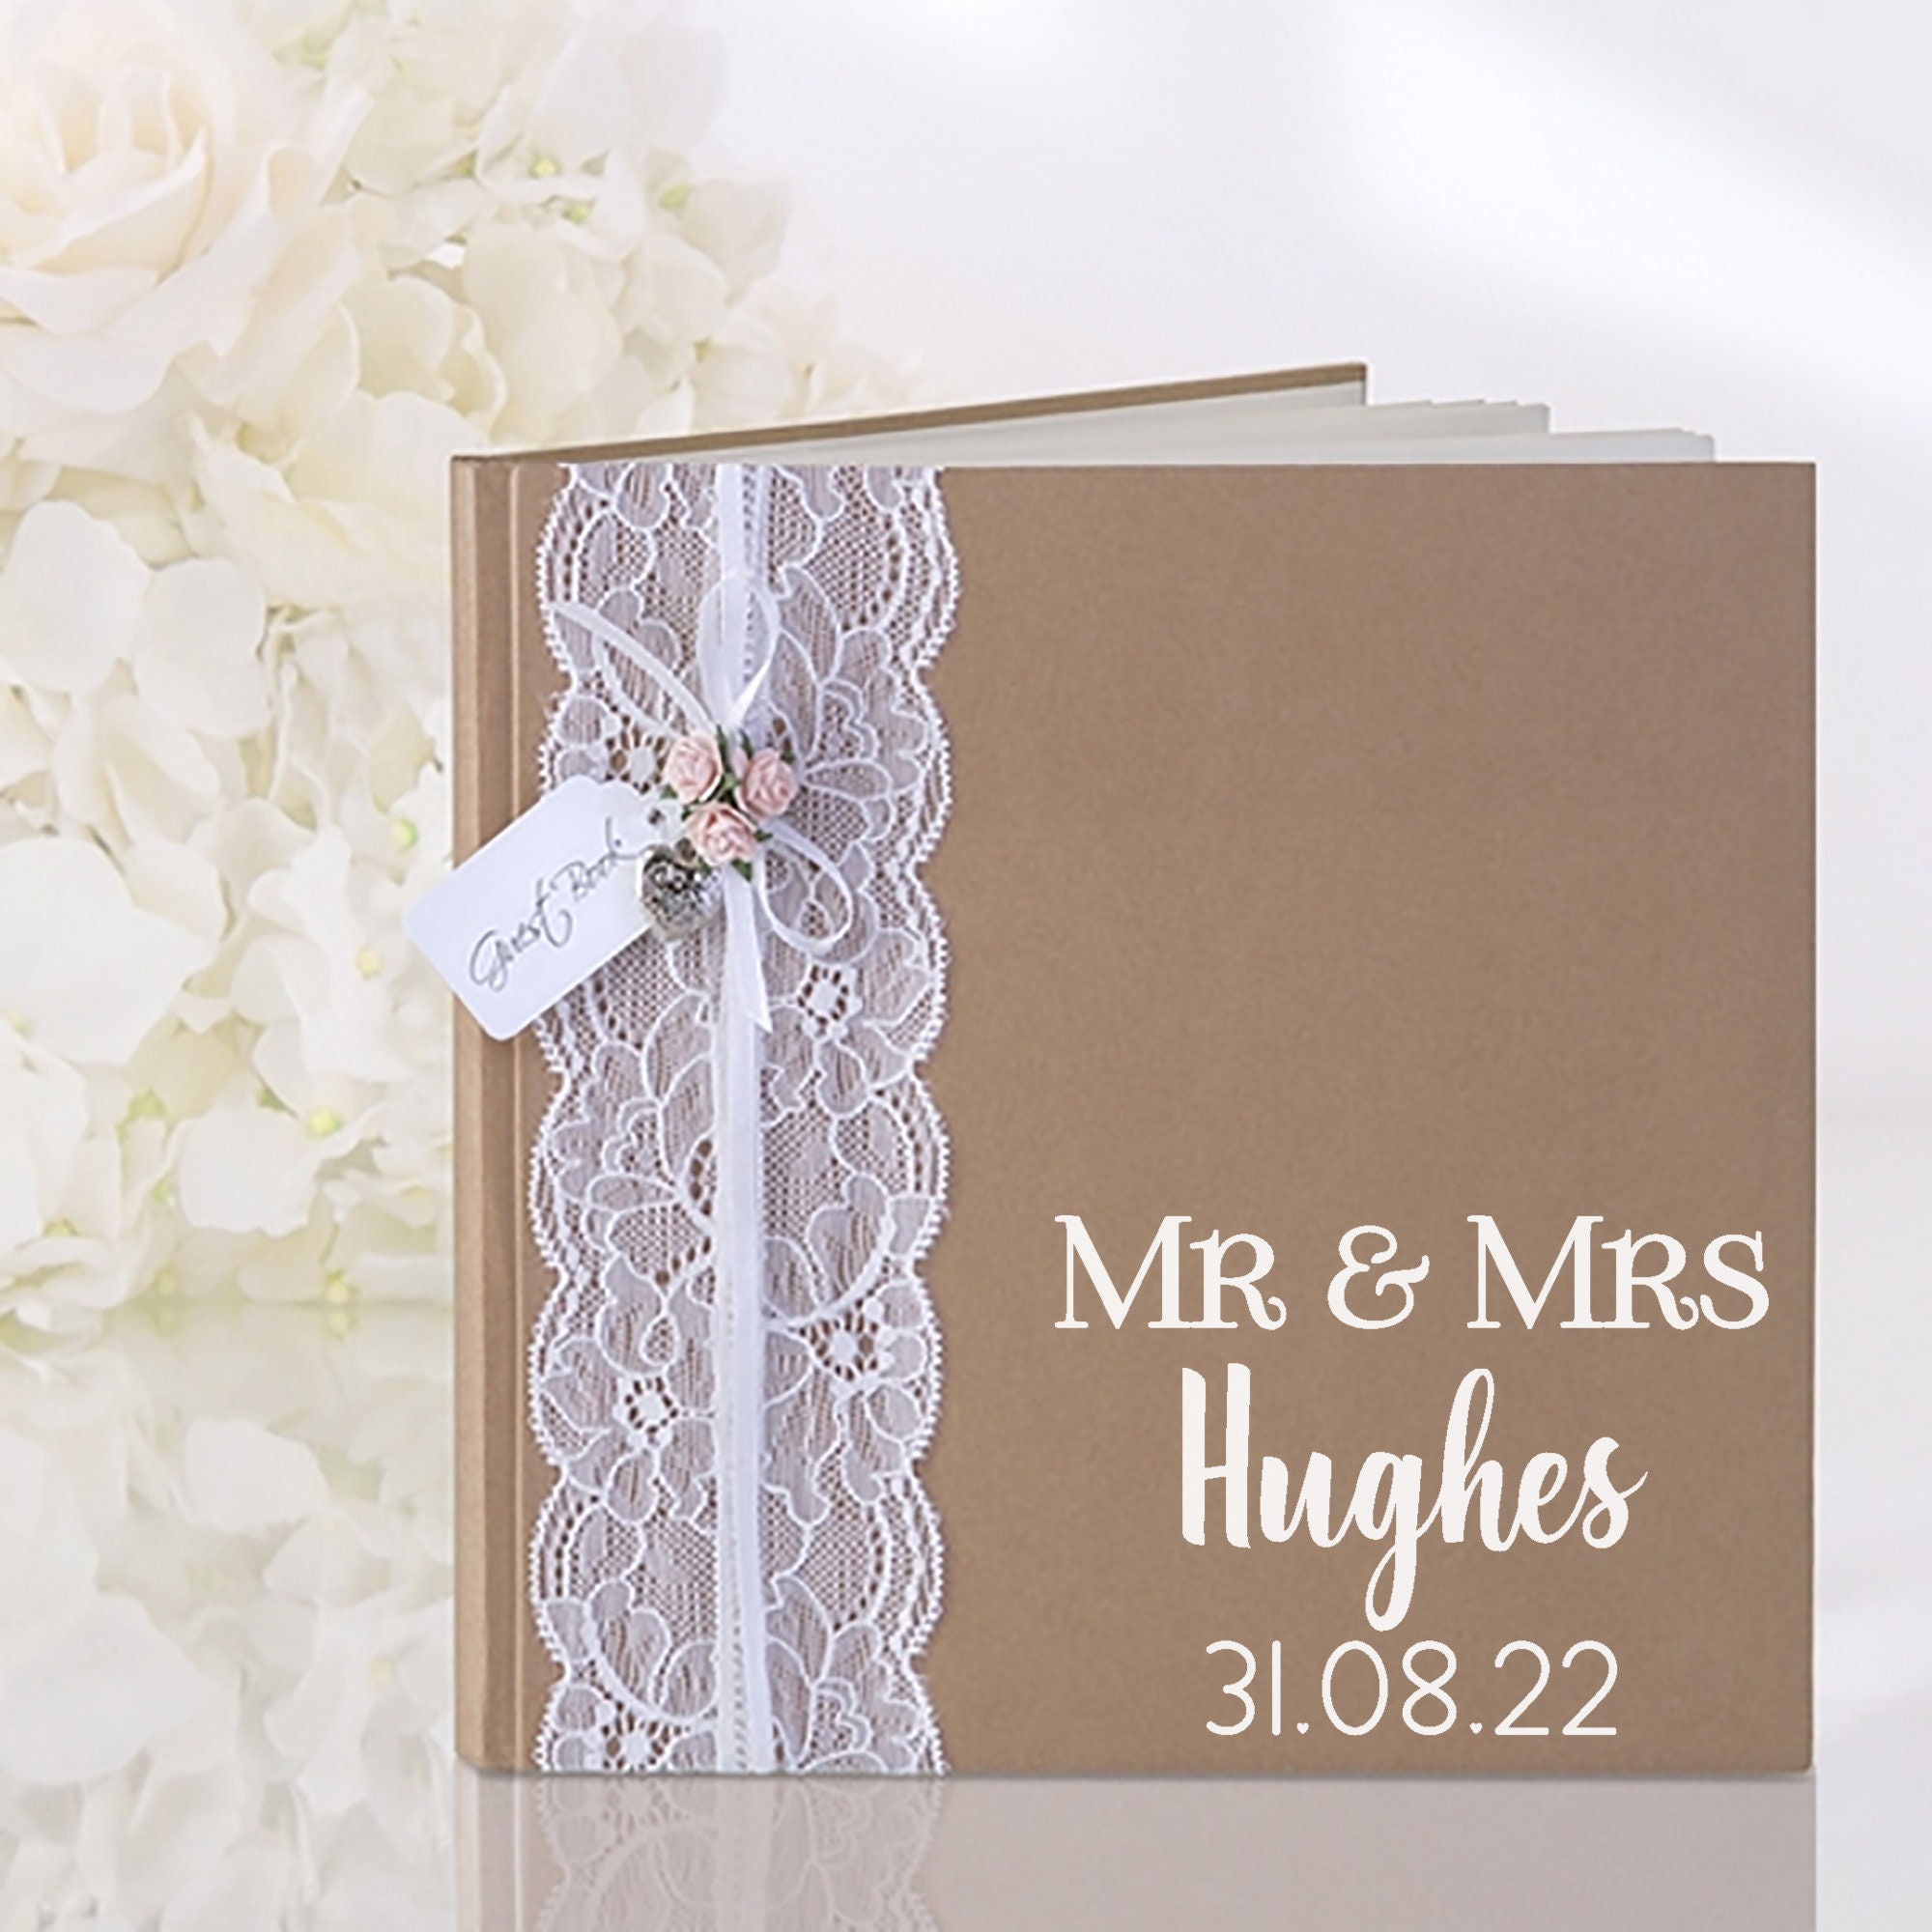 Wholesale lace wedding guest book For a Fashionable Wedding